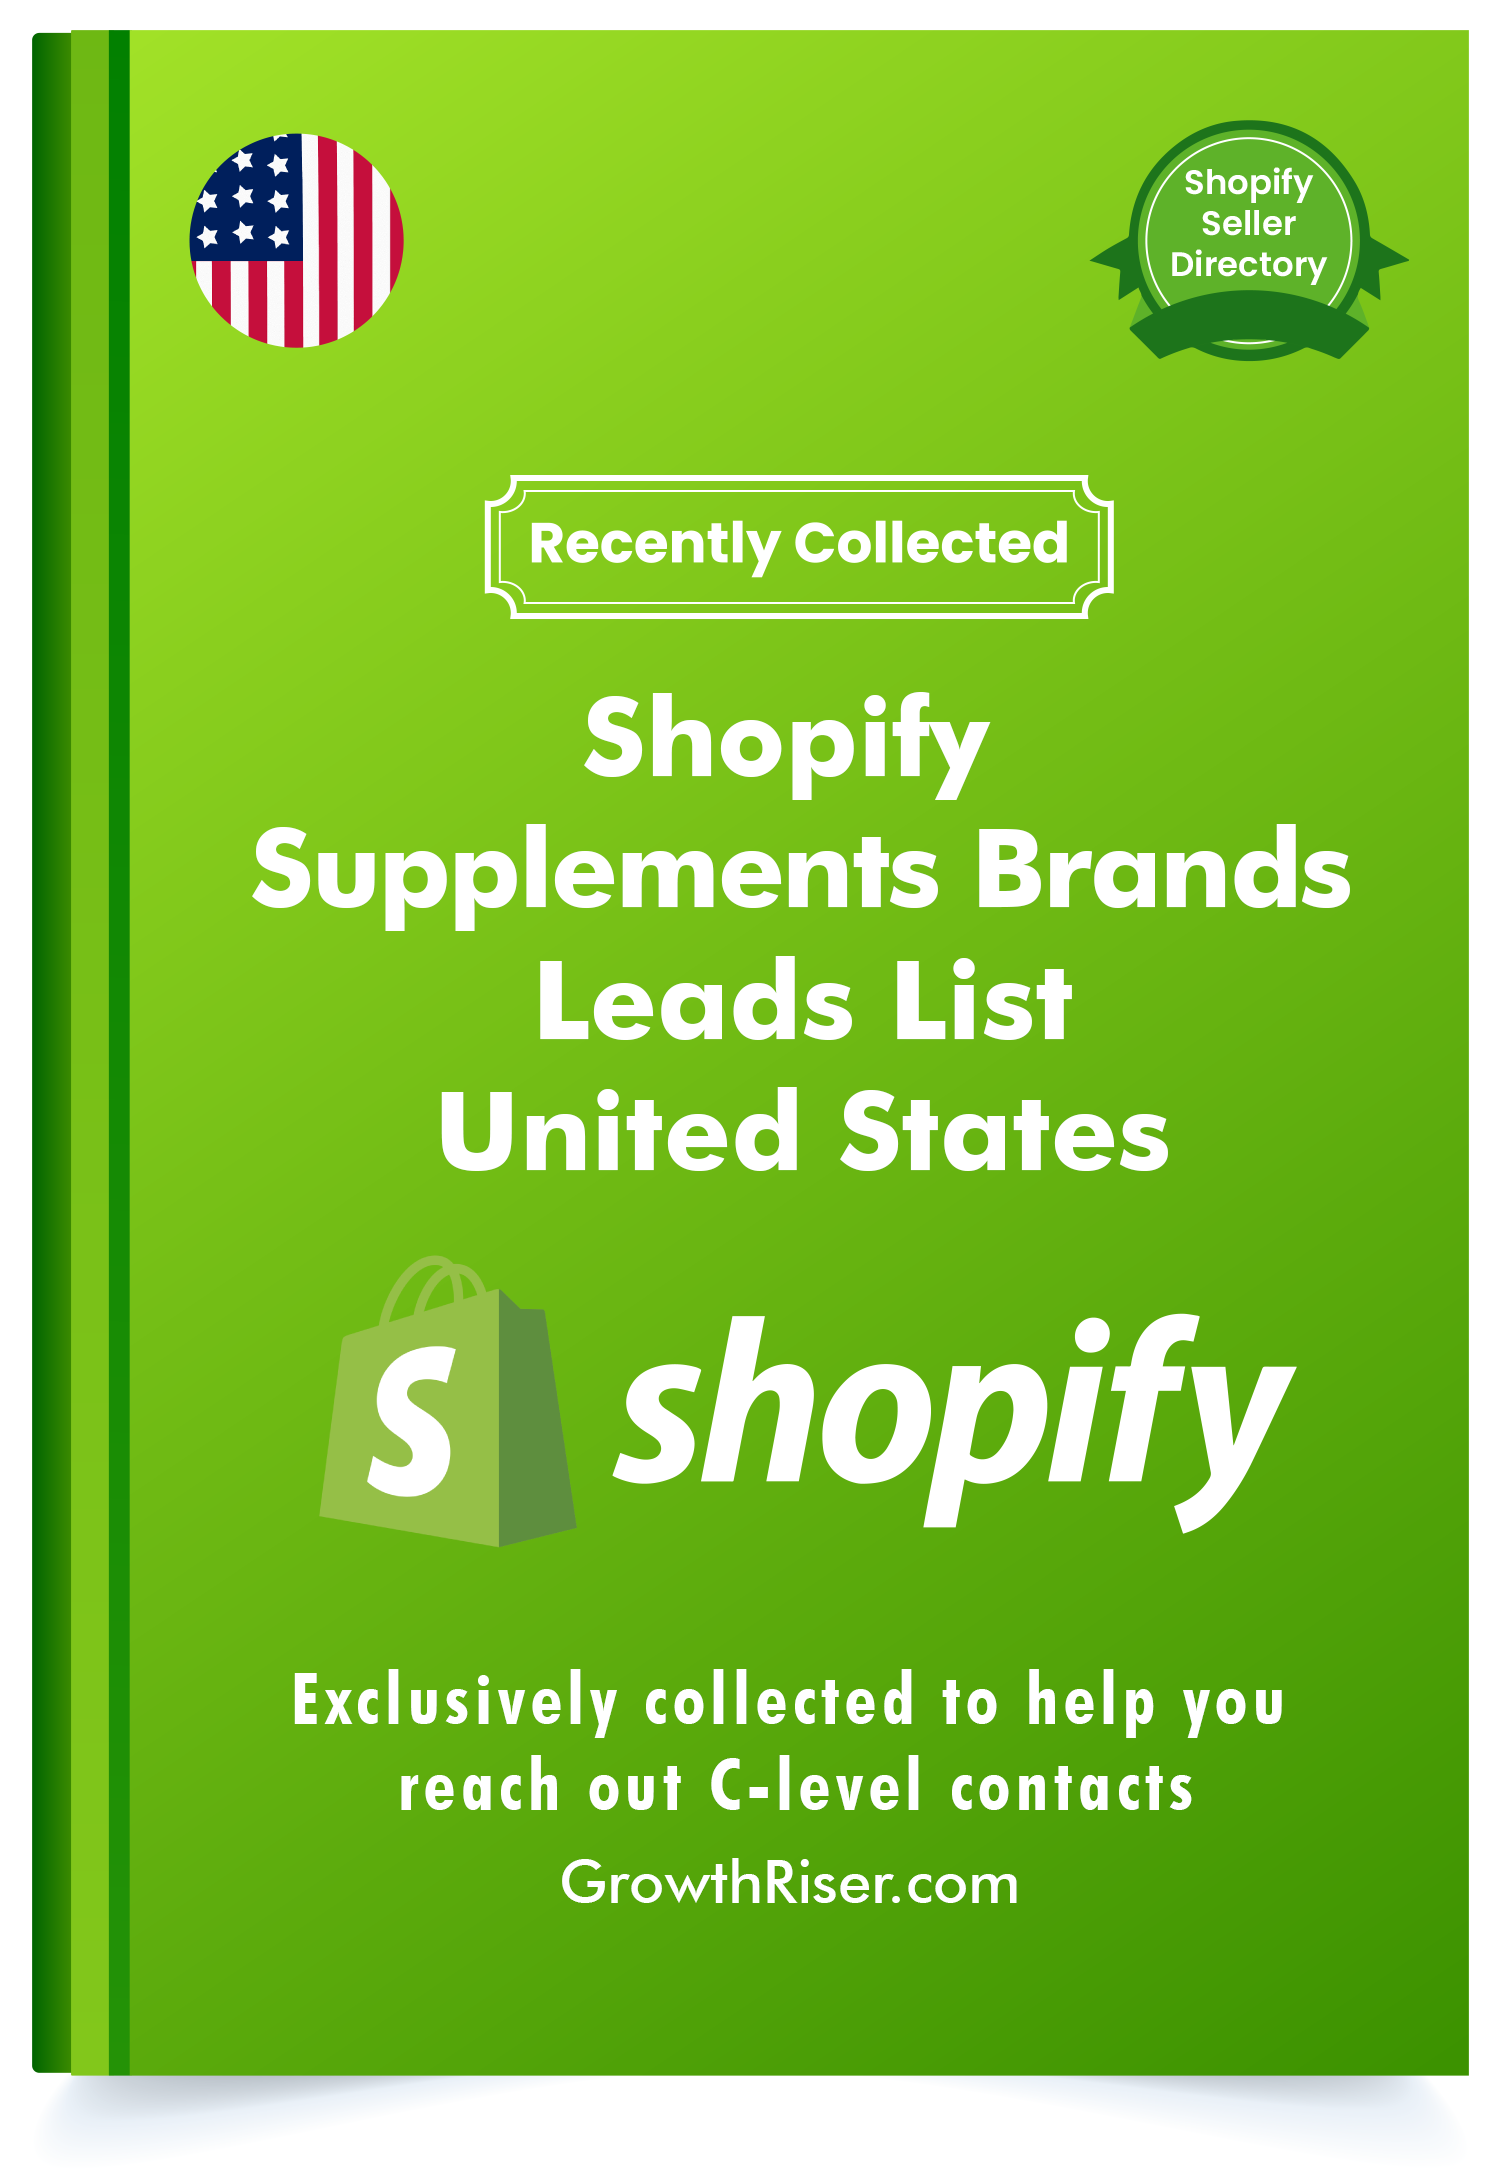 Shopify Supplements Brands Leads